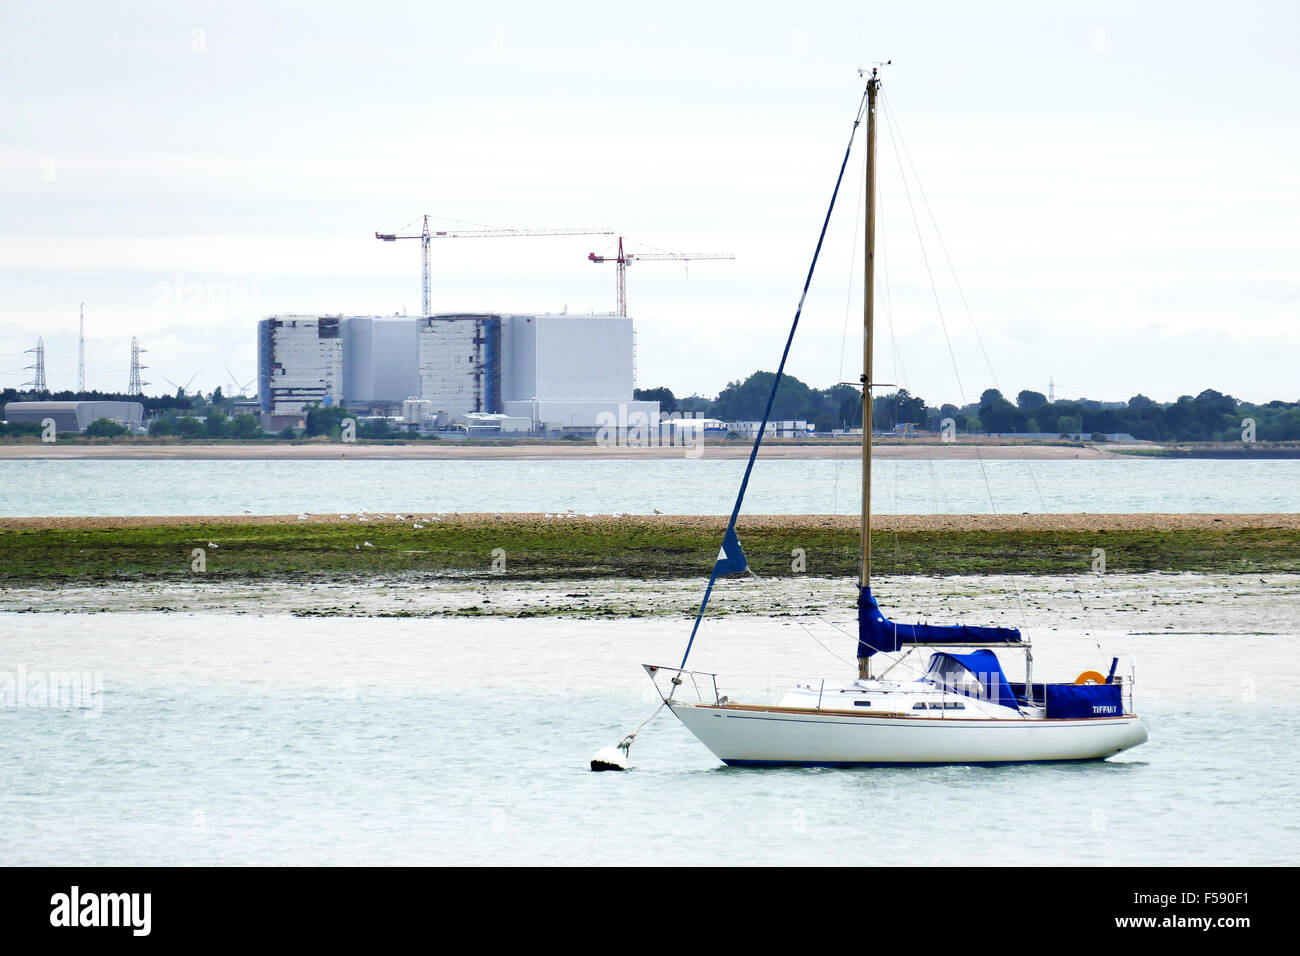 Bradwell nuclear power station Essex, photographed from West Mersea, Mersea Island looking across the river Blackwater Stock Photo